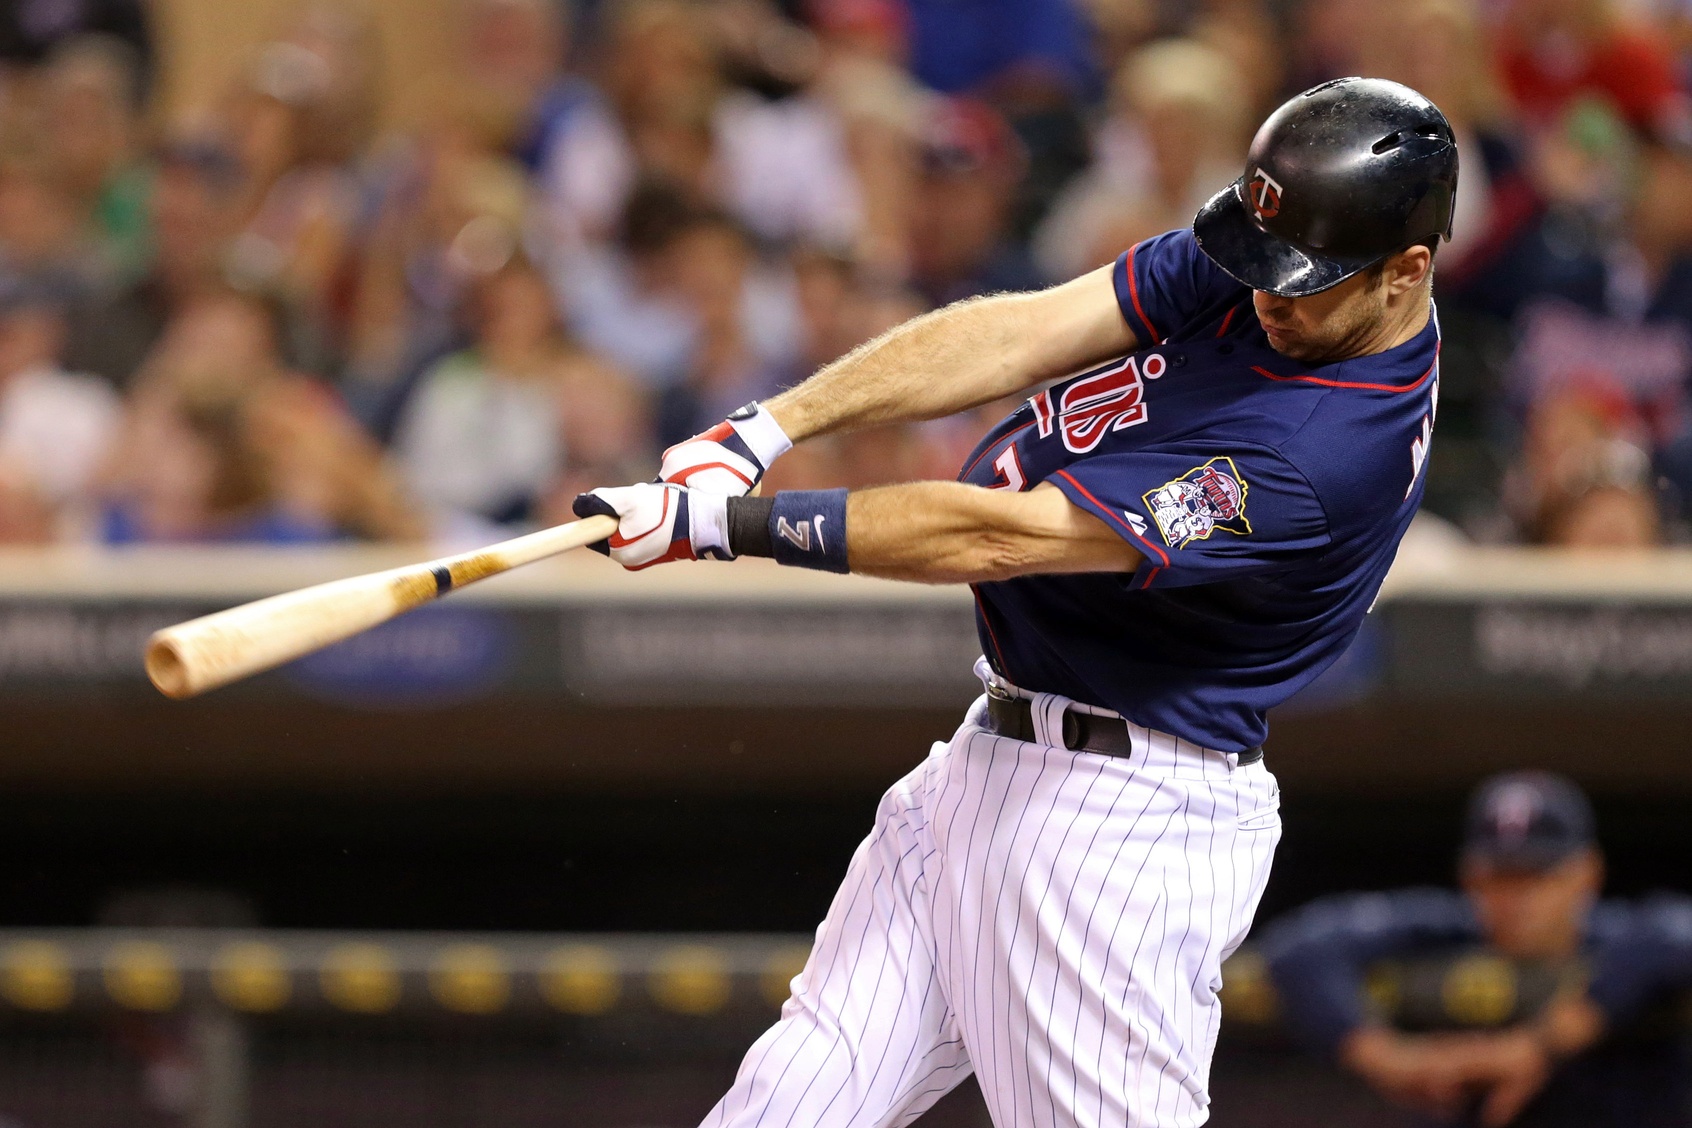 Joe Mauer will need to lead the Twins yet again this year. Photo by Jesse Johnson, USA Today Sports Images.